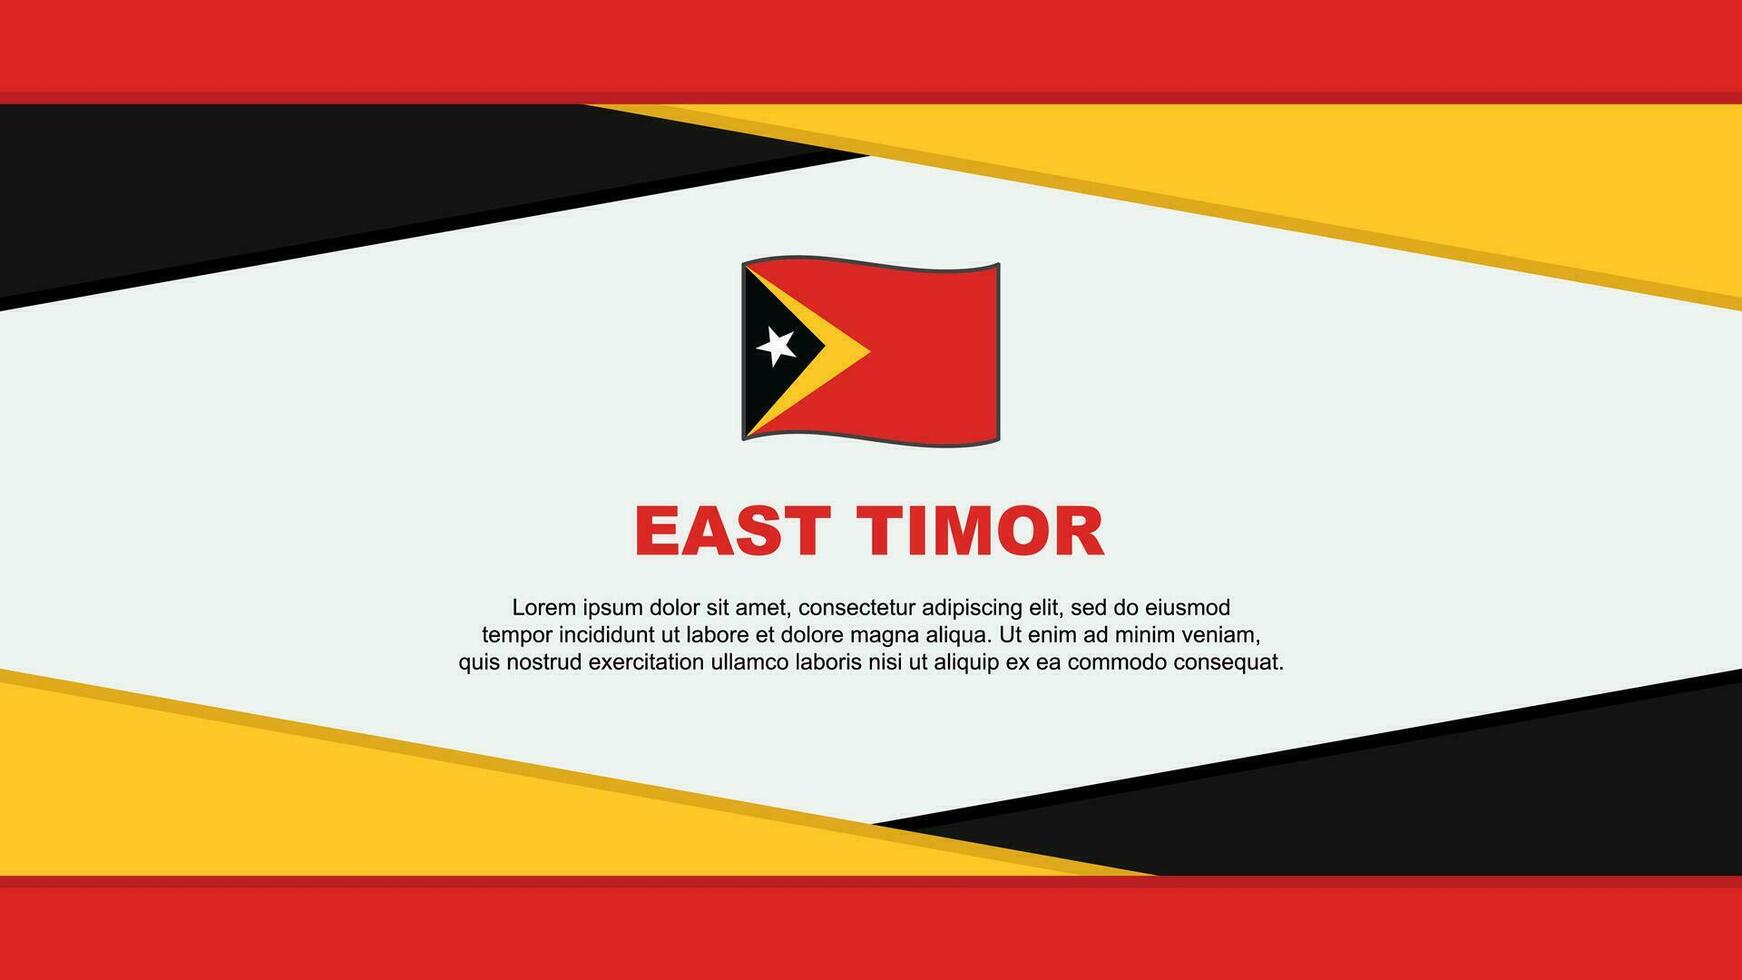 East Timor Flag Abstract Background Design Template. East Timor Independence Day Banner Cartoon Vector Illustration. East Timor Vector